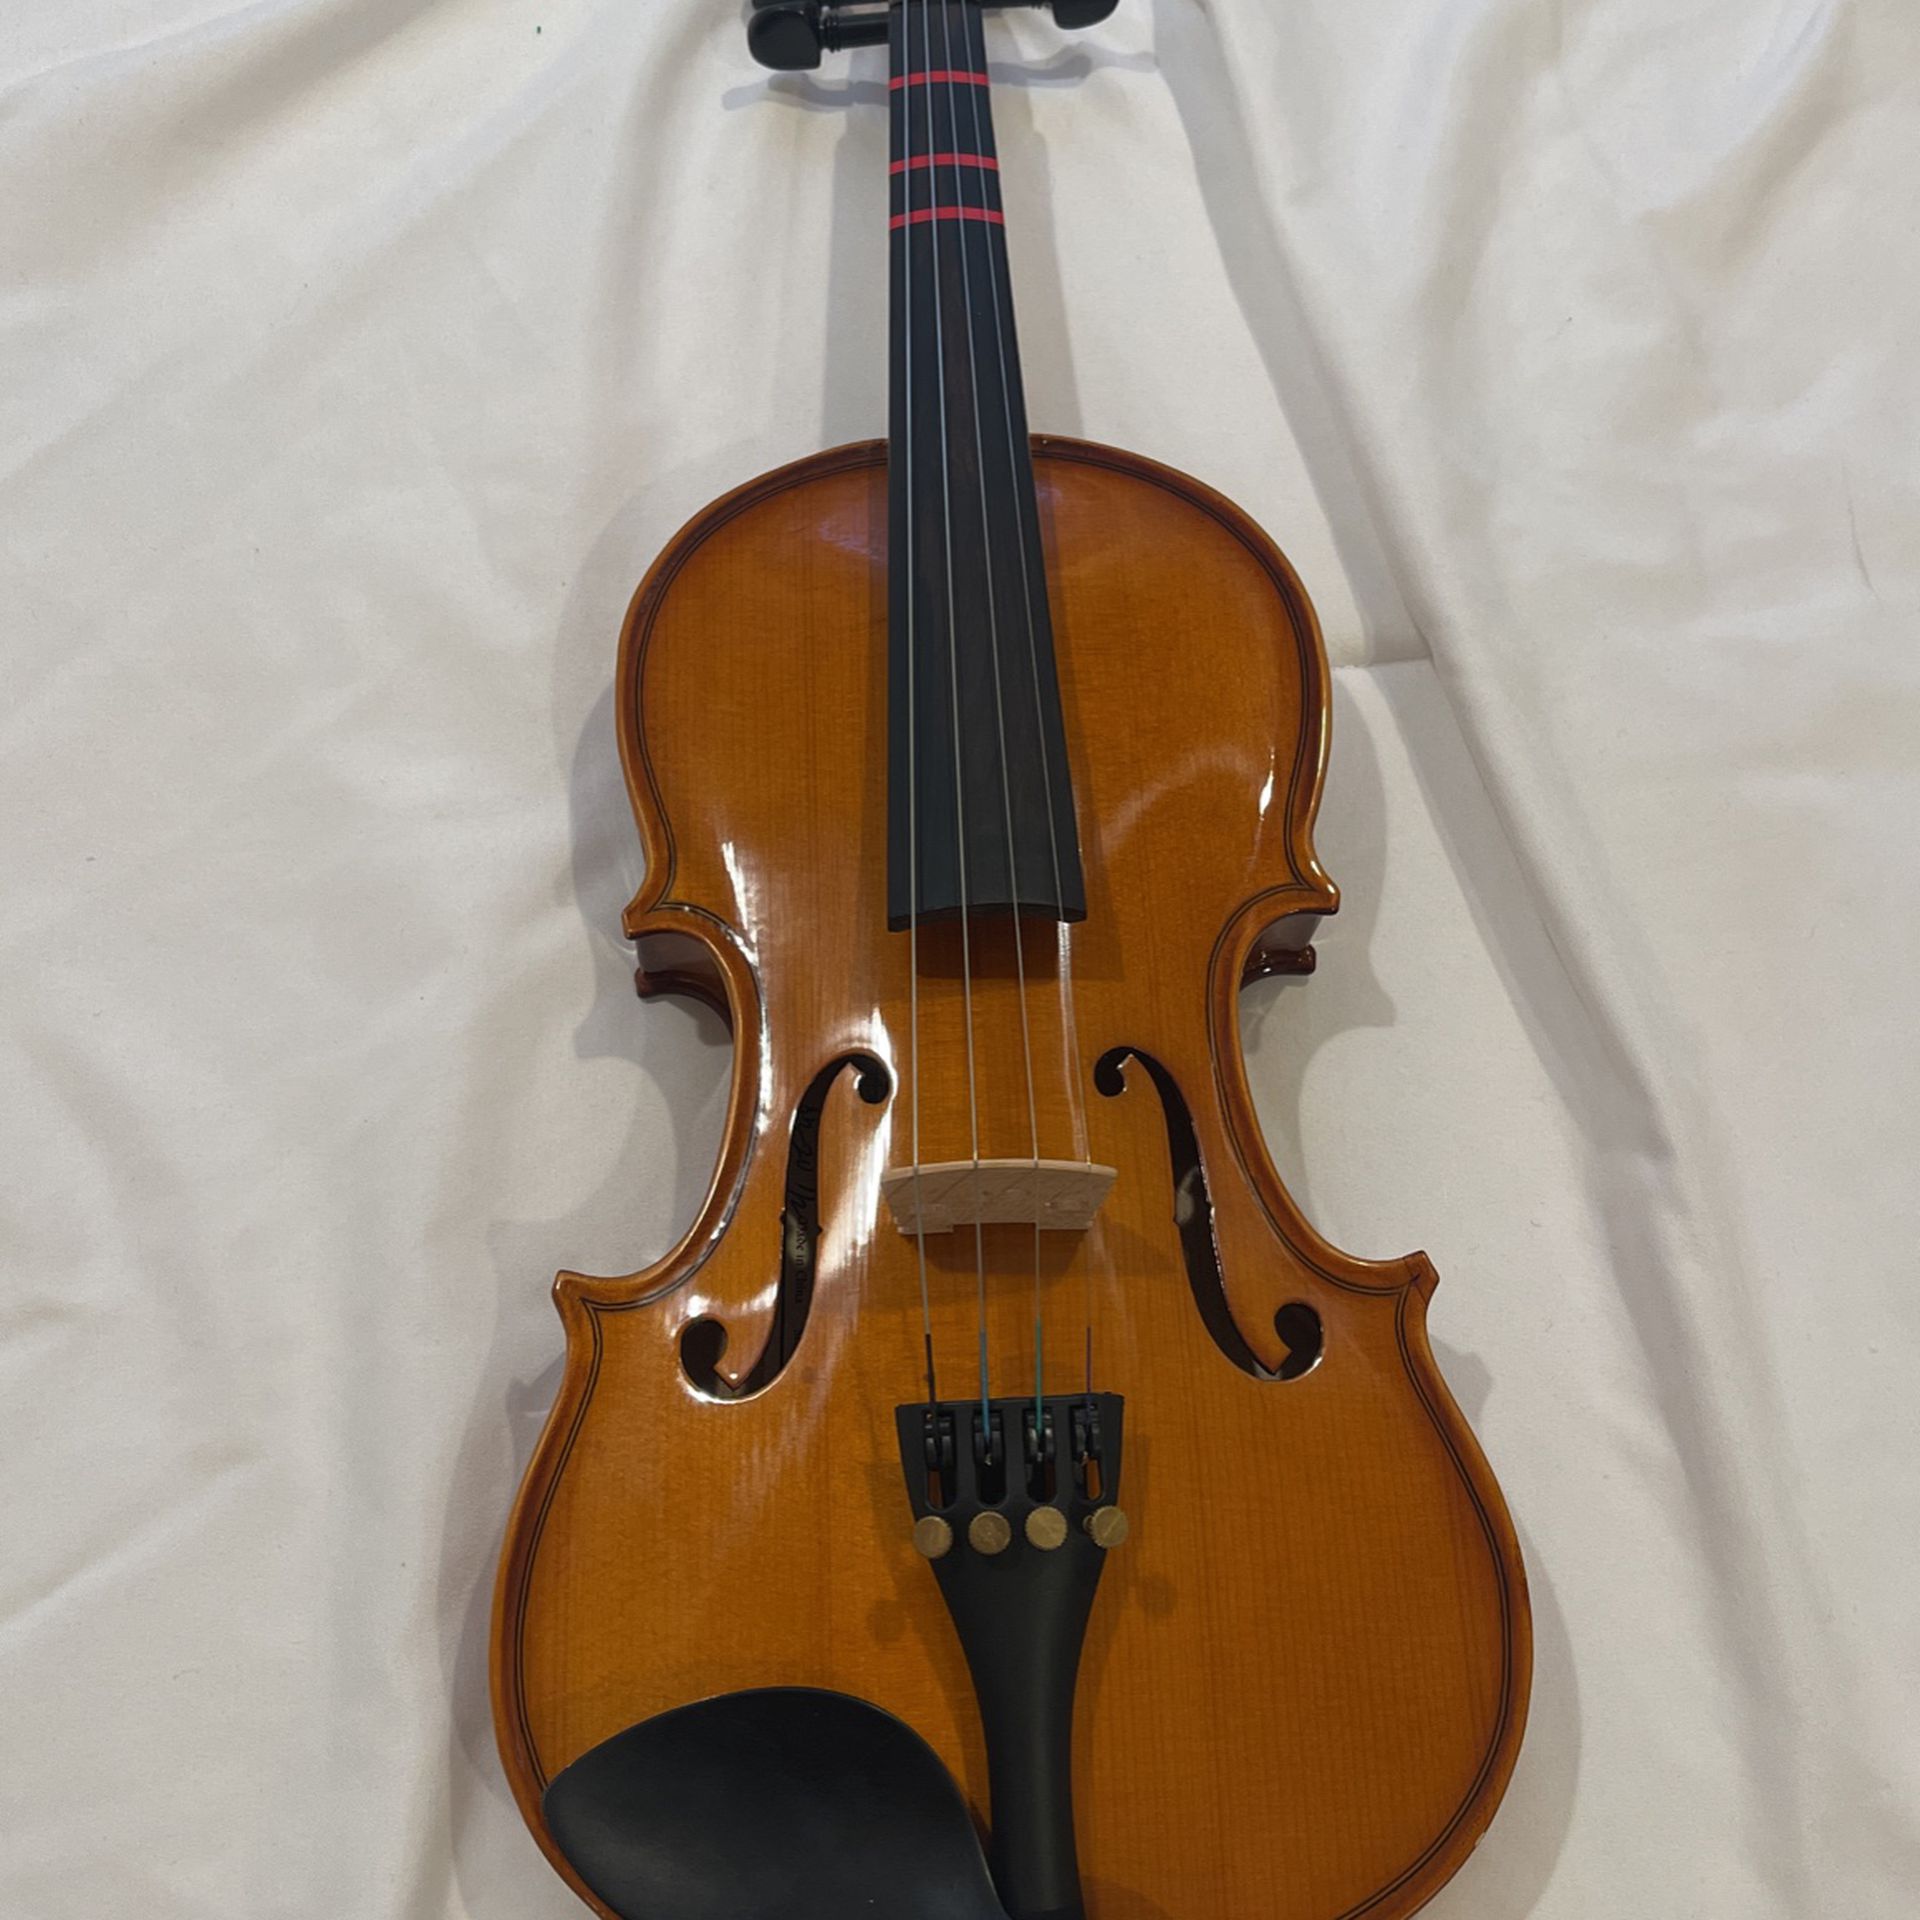 Children’s Violin, Bow, and Music Stand